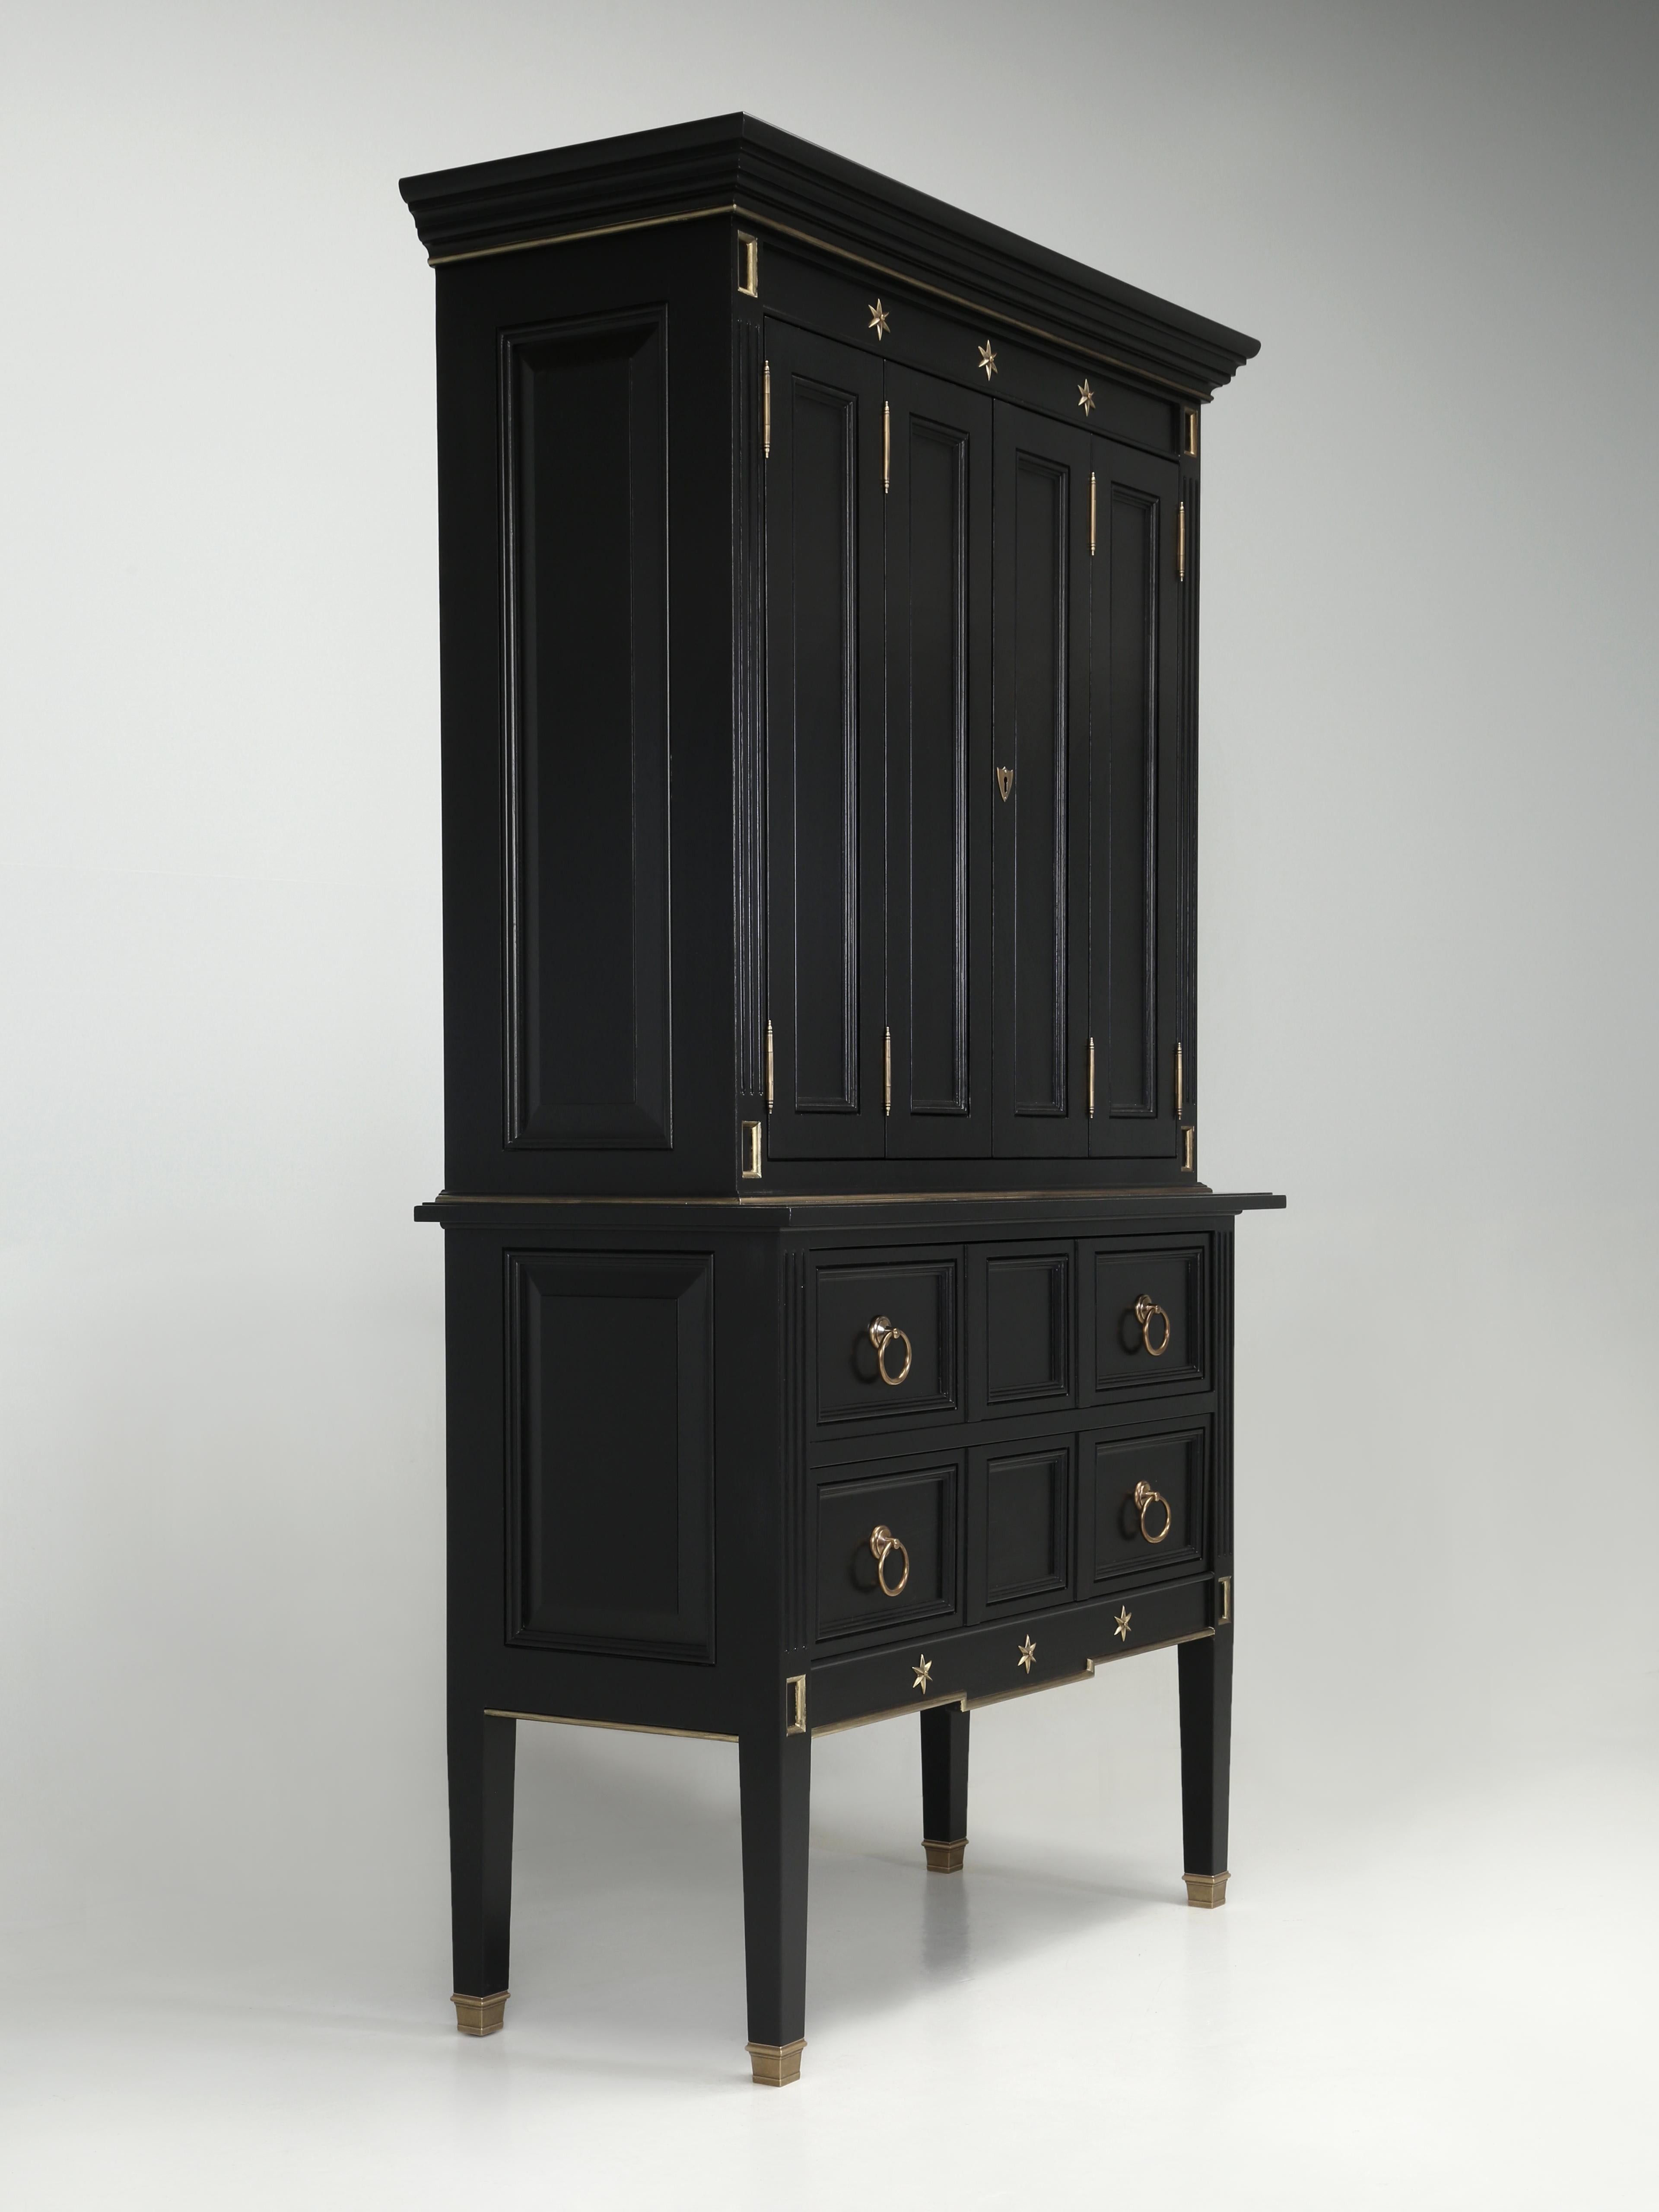 Custom made to order from the Old Plank Collection of furniture in your specific dimensions and specifications a high-quality cabinet inspired by the famous French designer Jacques Adnet. This is a design that we have been producing for decades and